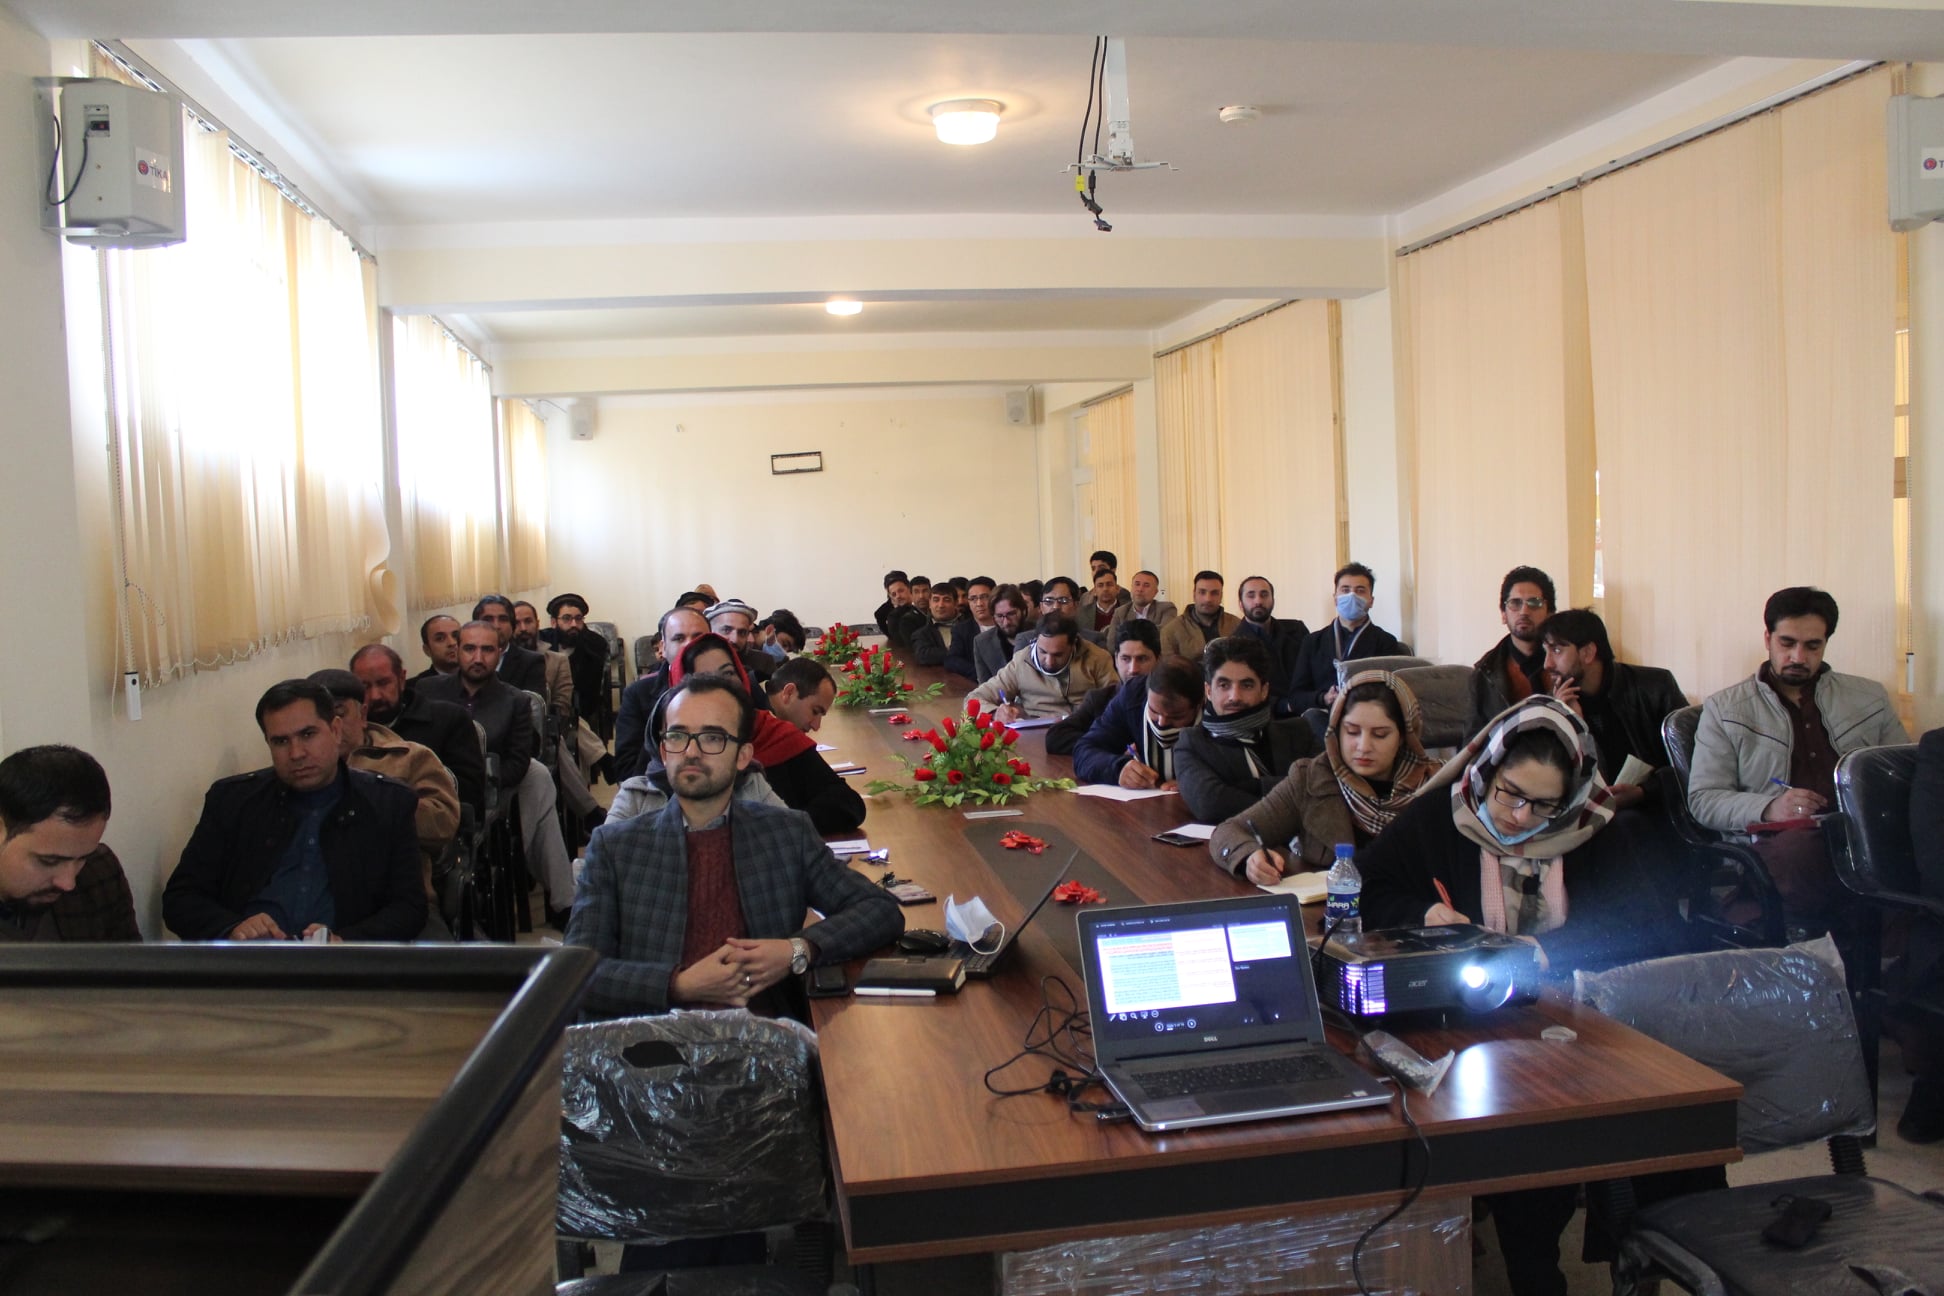 Eleventh criteria of Quality Assurance and Accreditation Workshop established for Parwan University Lecturers 23-Dec-2020